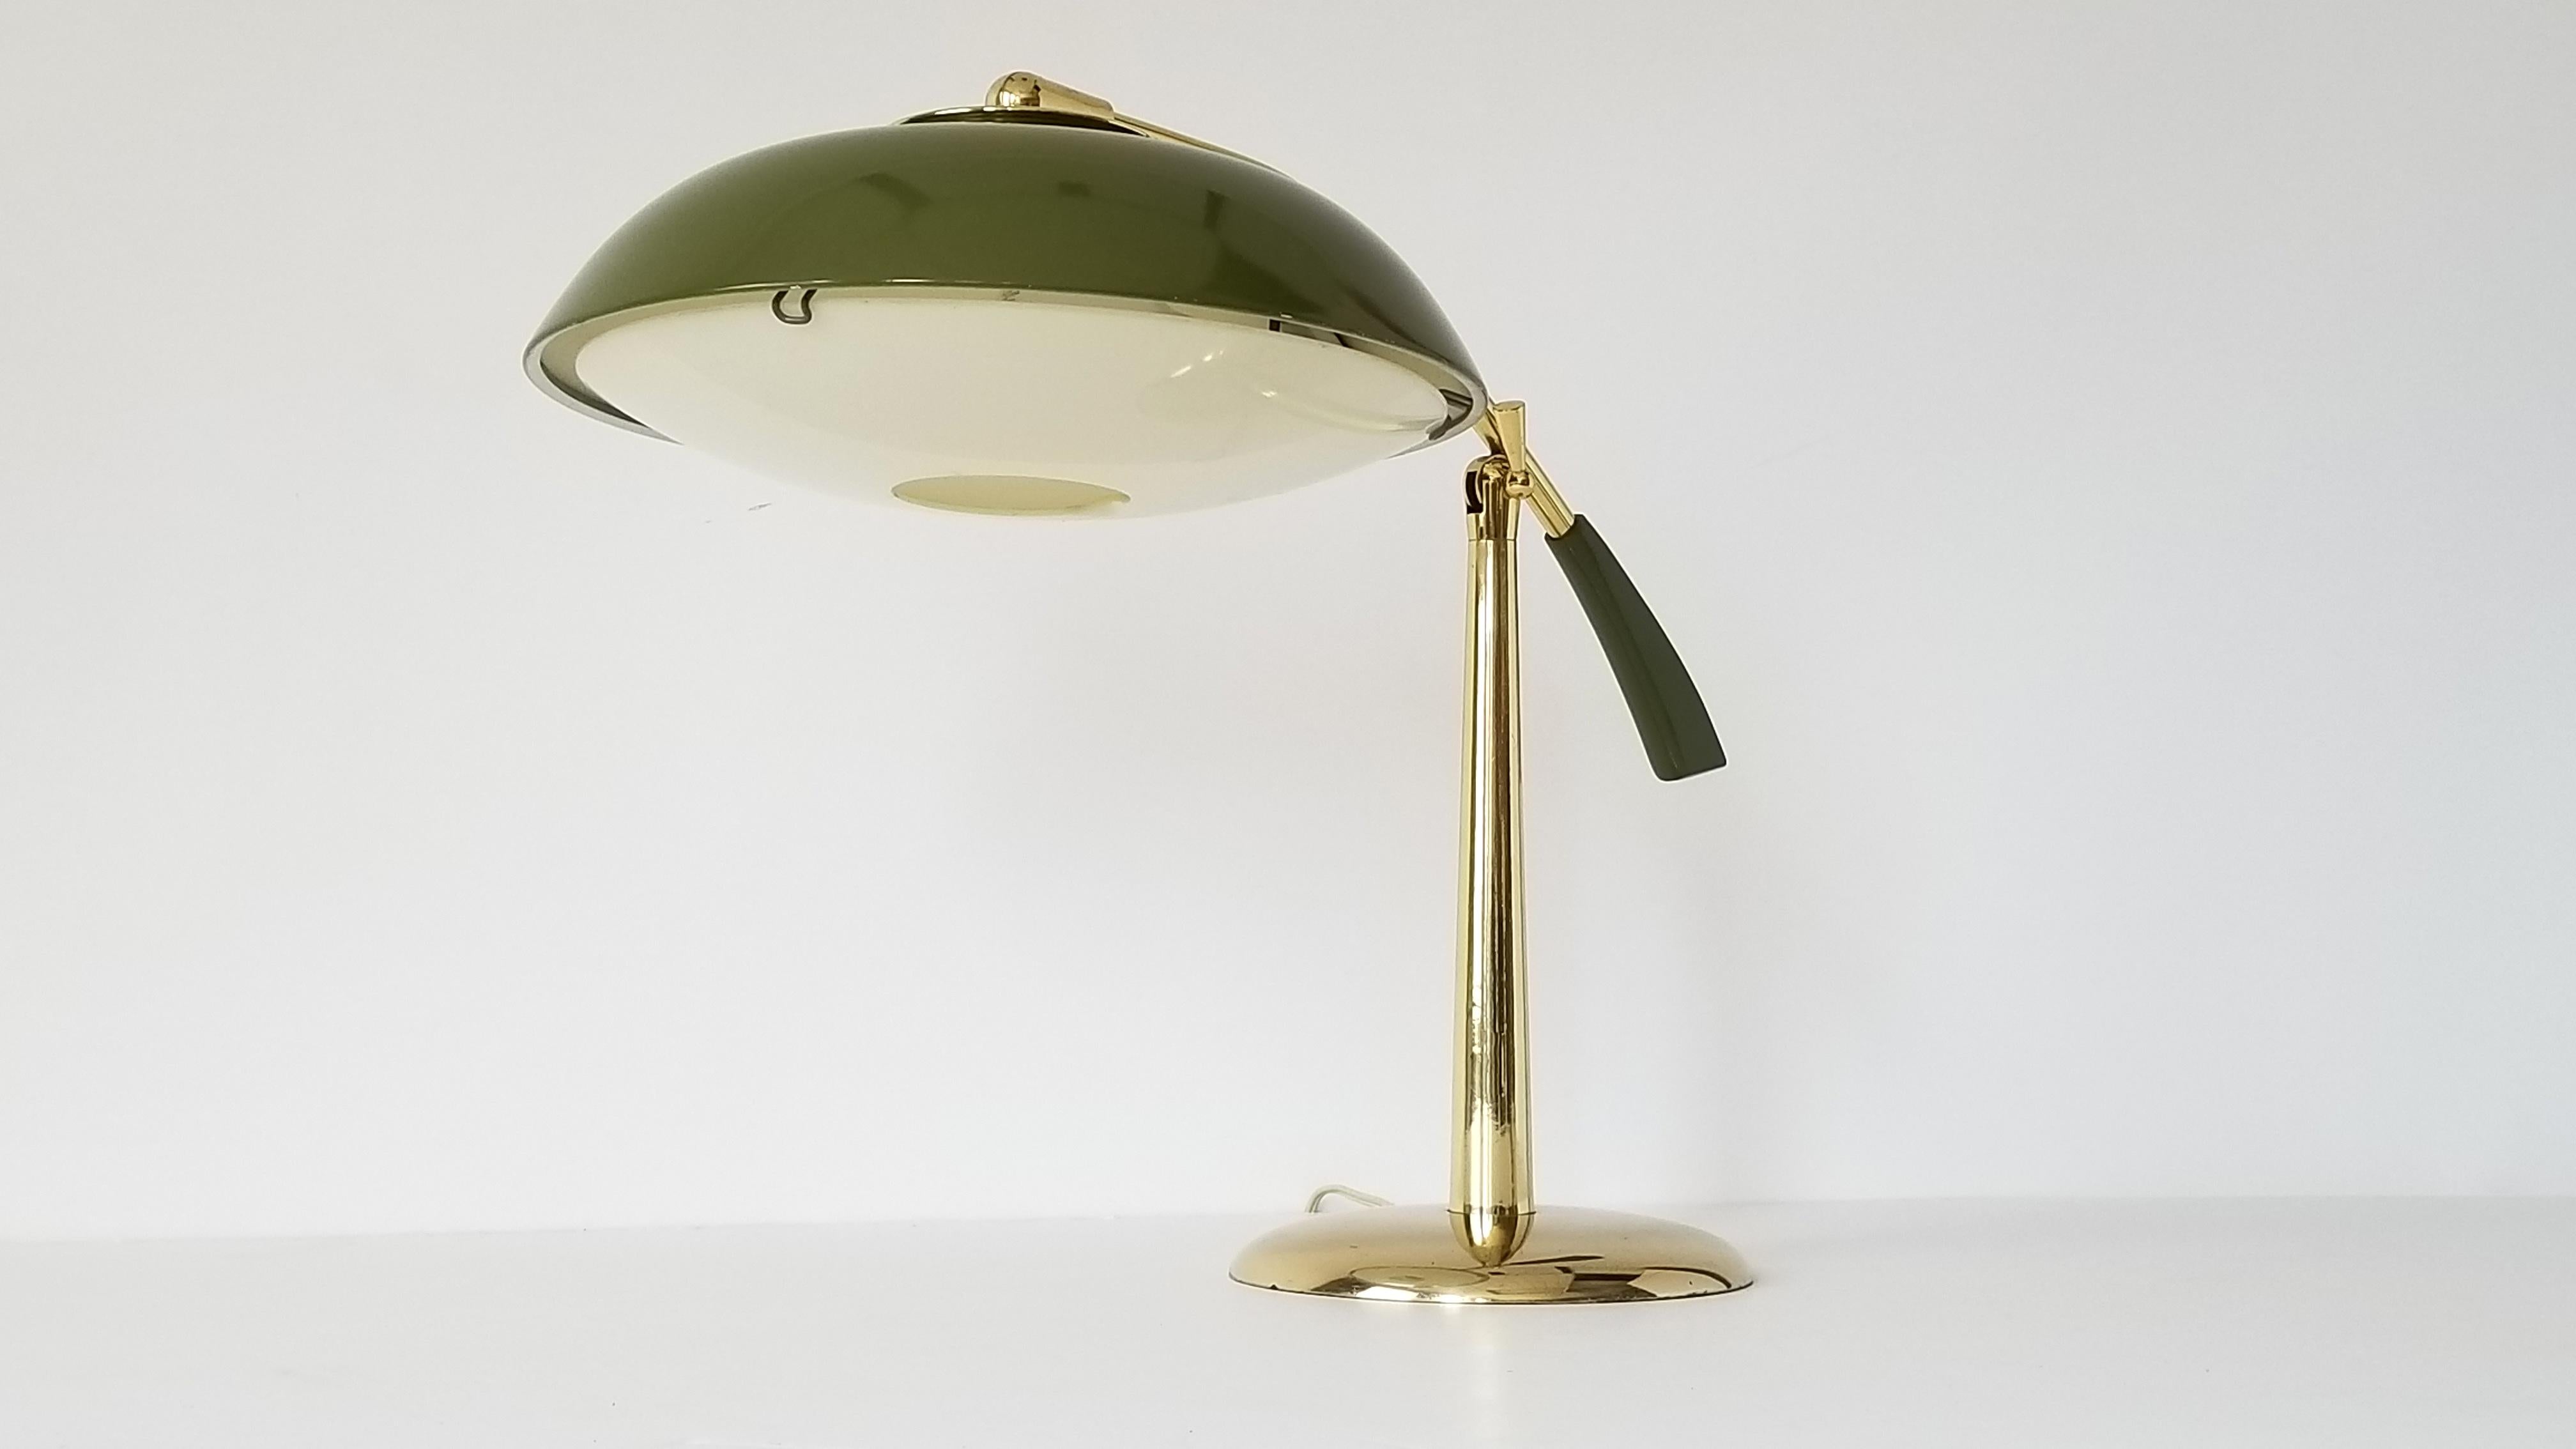 Brass table lamp with an olive green enameled shade and counterweight. 

Acrylic diffuser under.

Shade measure 13 inches diameter. 

On/Off rotating switch on shade.

Regular E26 size socket.